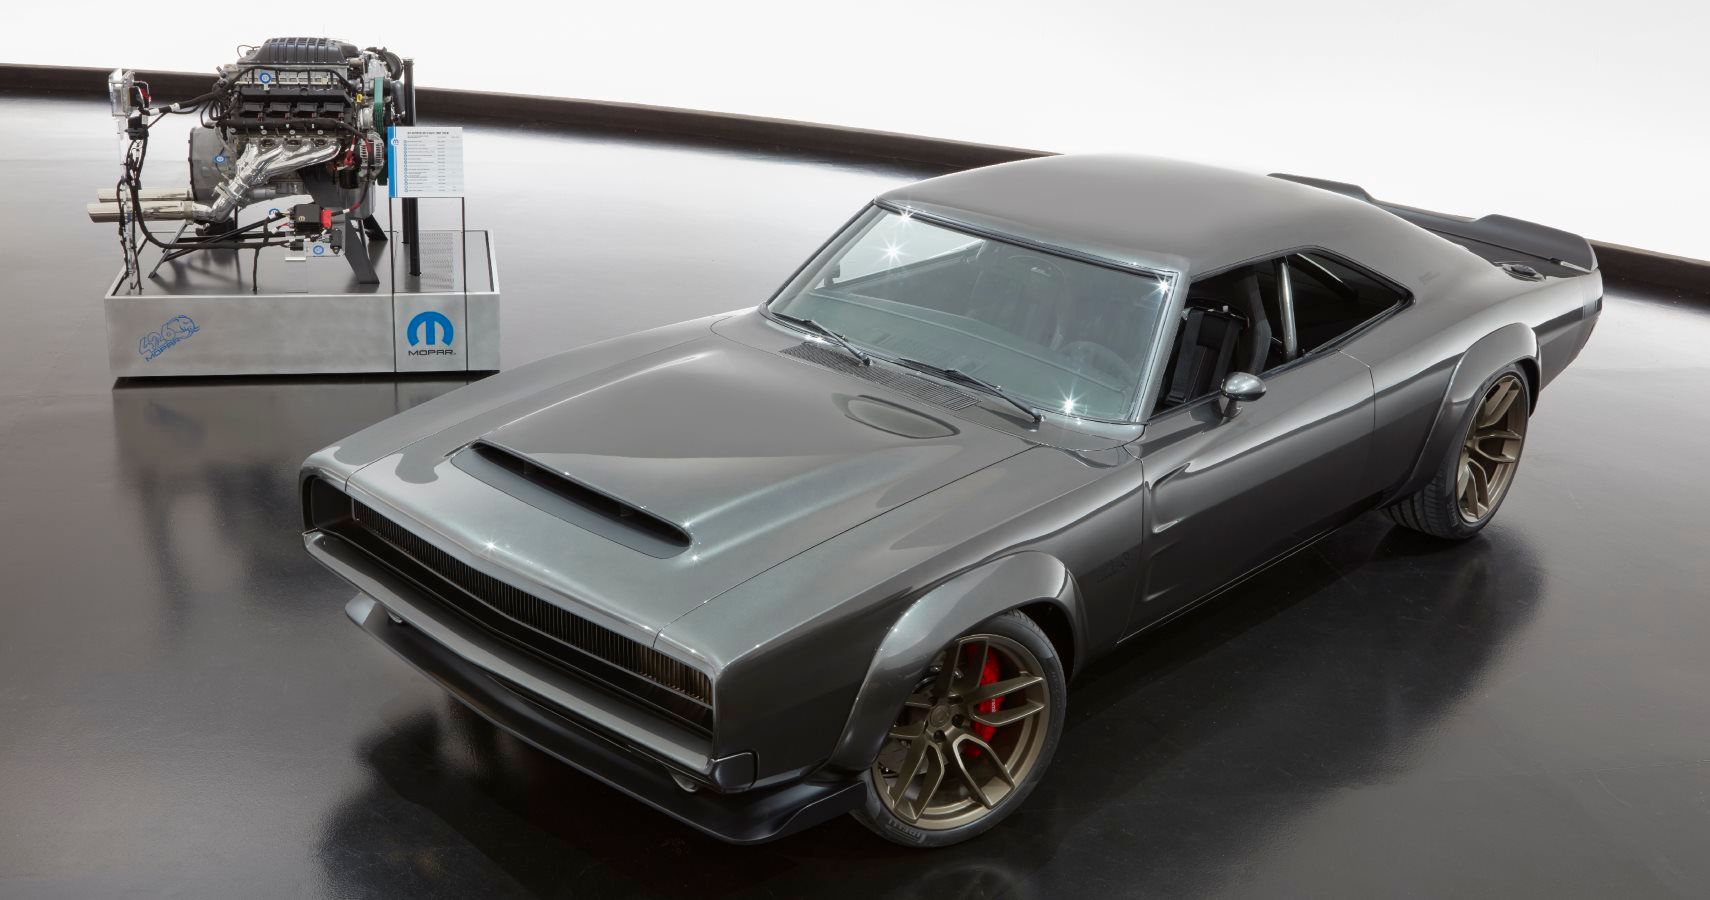 The 1968 Dodge “Super Charger” Charger Concept incorporates modern touches, including the new 1,000 horsepower “Hellephant” 426 Supercharged Mopar Crate HEMI® Engine, shown in background, to reimagine one of the most iconic vehicles ever built by FCA US.